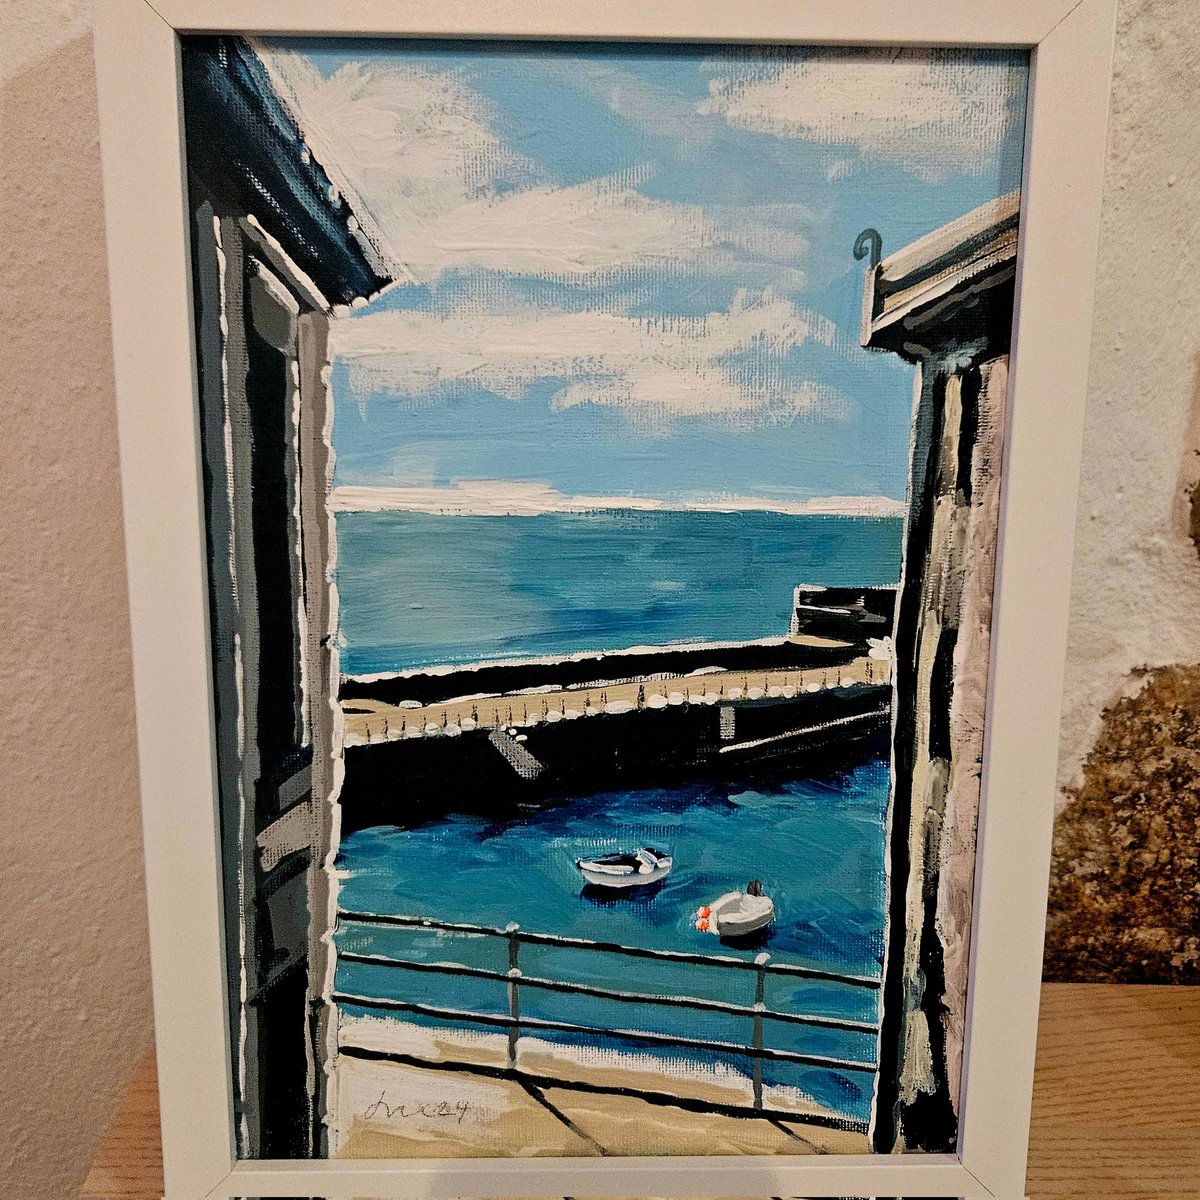 A beautiful painting of the view from my  window in #Mousehole gifted to me by gifted artist and graphic designer Jim Duncan.
#art